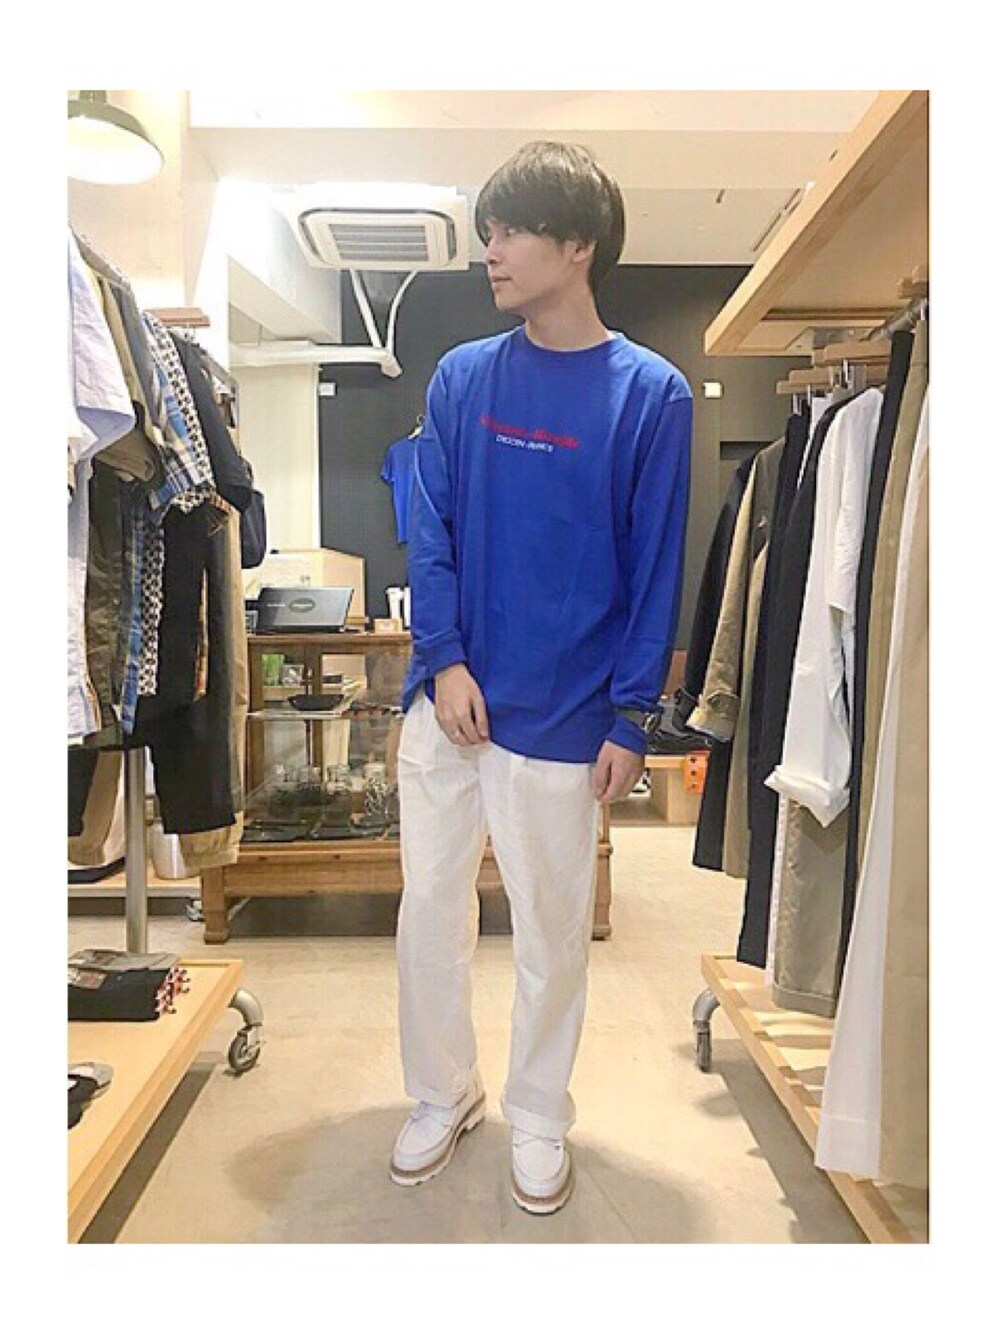 ST&DARD MADE. 川瀬さんの「【VINCENT ET MIREILLE】ヴァンソン エ ミレイユ LOOSE SILHOUETTE LONG TEE-SH ルーズシルエットロングティーシャツ（Vincent et Mireille）」を使ったコーディネート